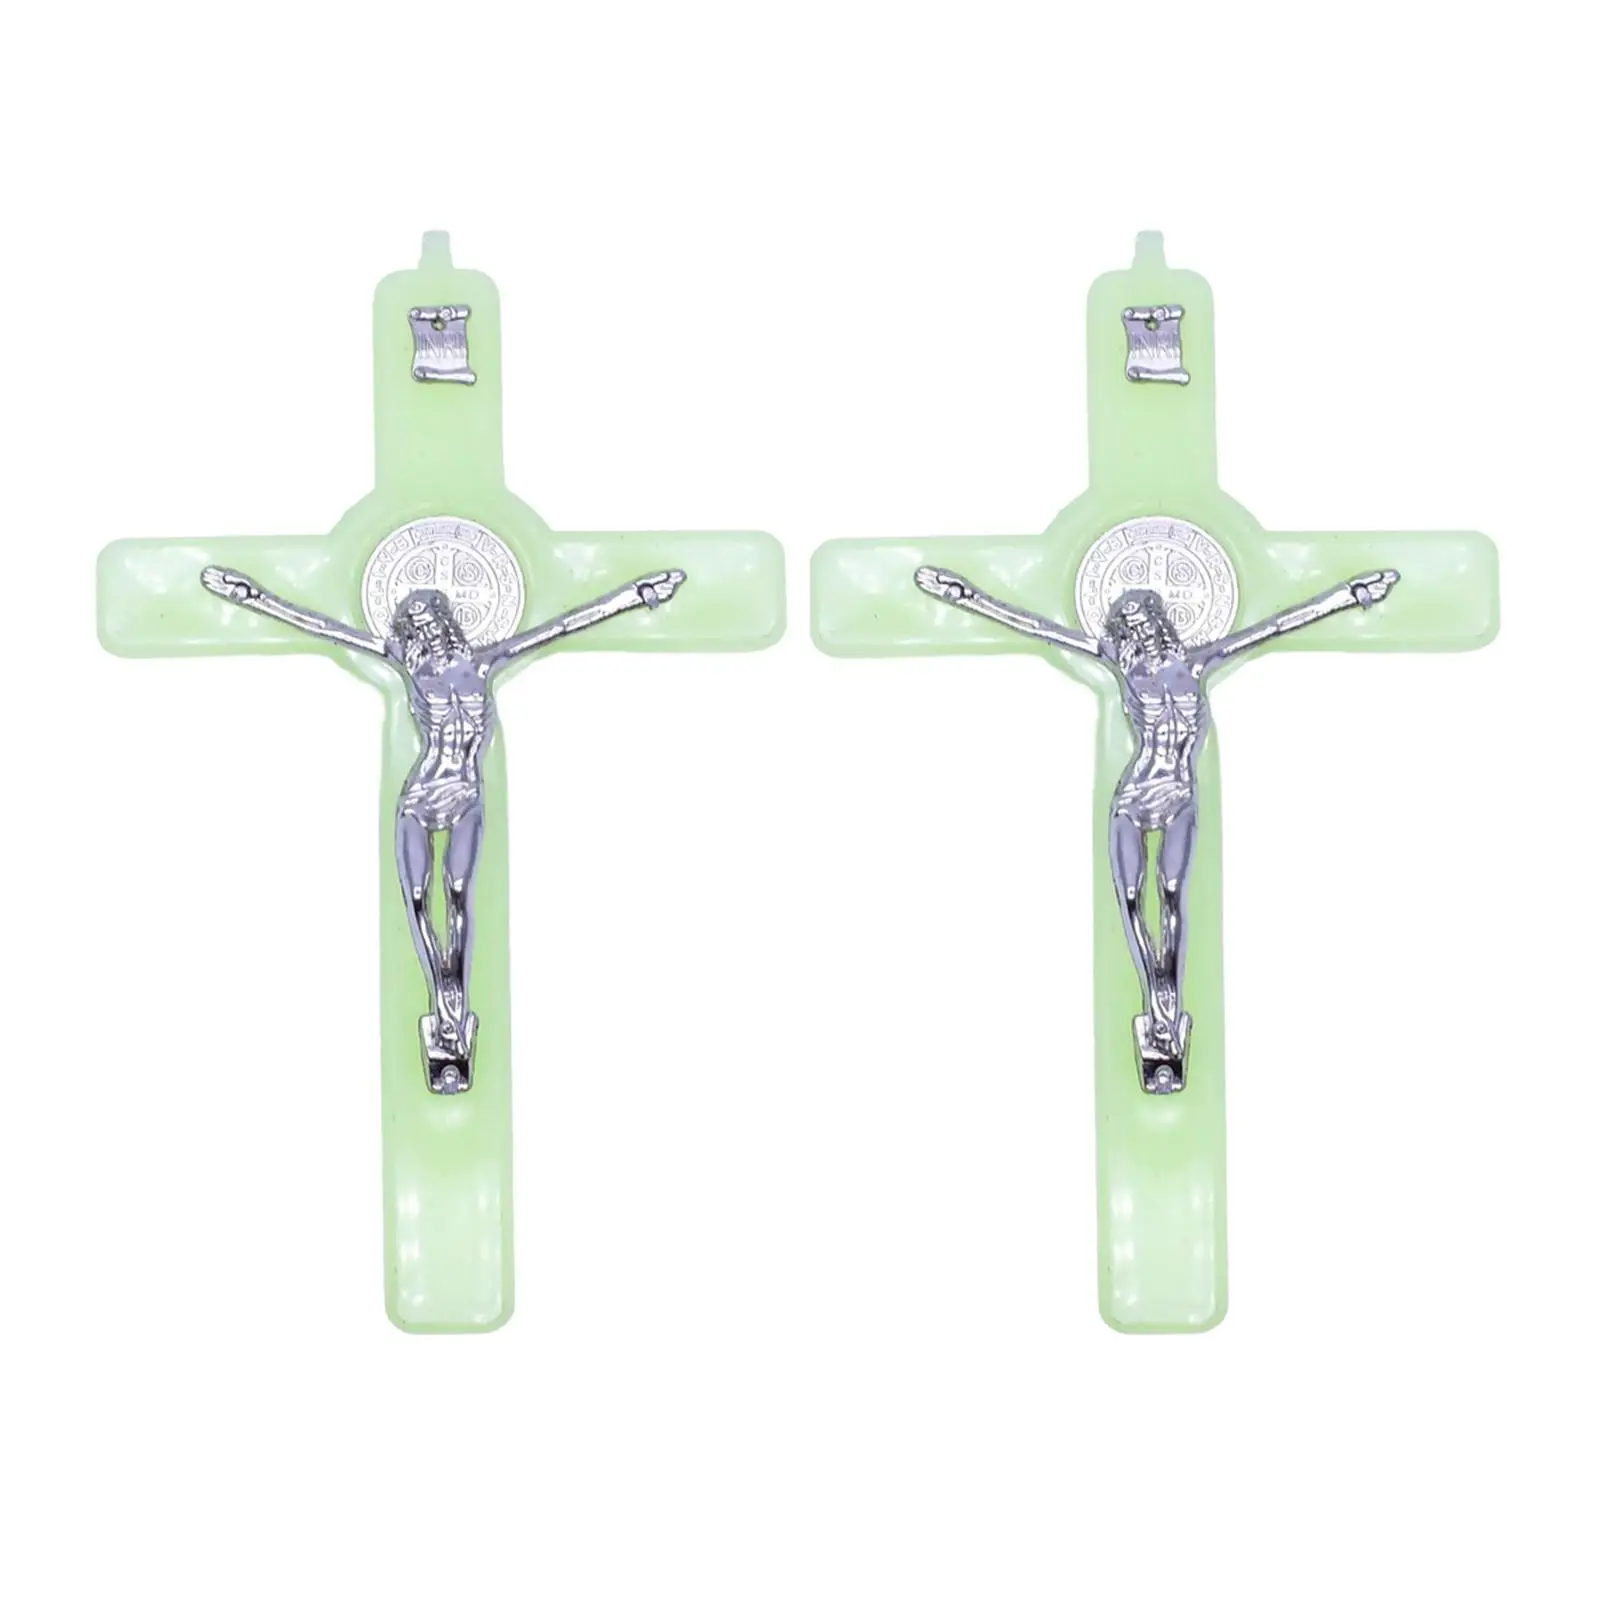 Vintage Jesus Cross Crucifix Ornament Pendant Wall Ornament Hanging Decor for Church Decoration for Home Decoration Compact